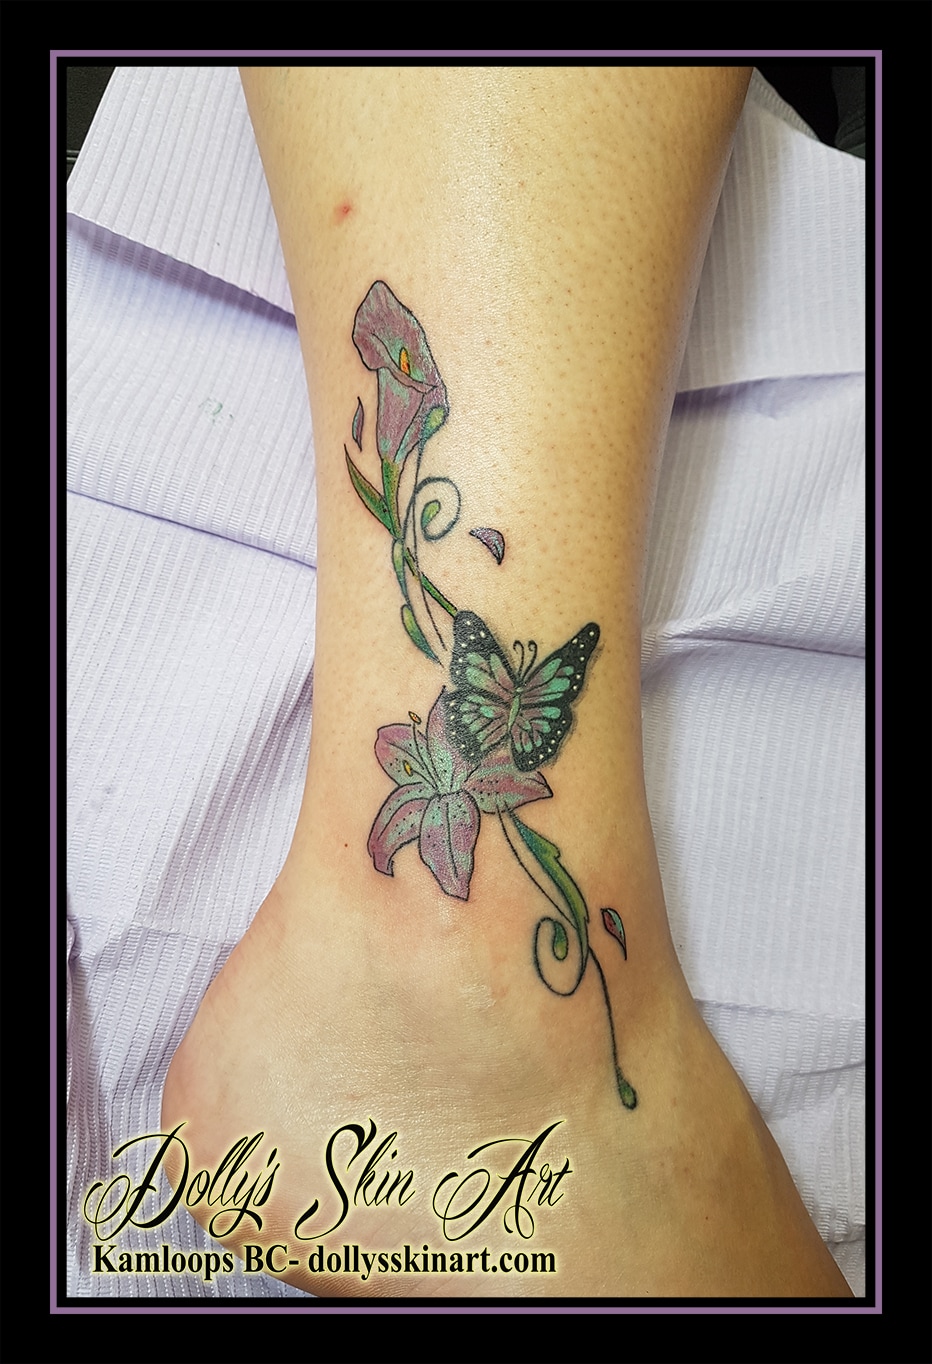 colour lily butterfly flower green purple ankle additions tattoo kamloops dolly's skin art